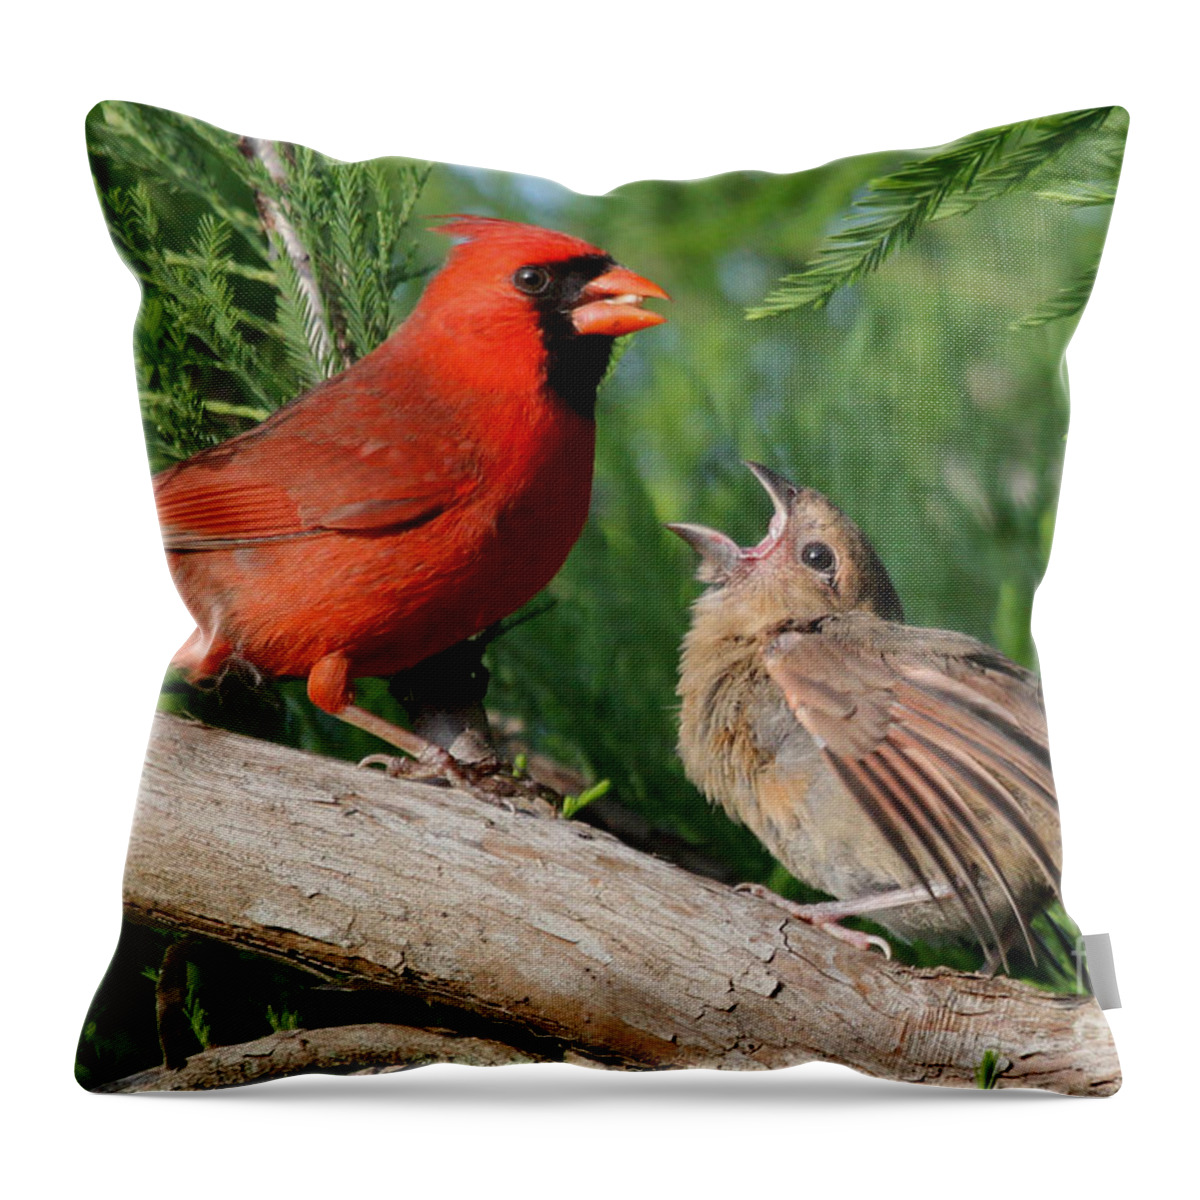 Northern Cardinal Throw Pillow featuring the photograph Feed Me - Northern Cardinals by Meg Rousher